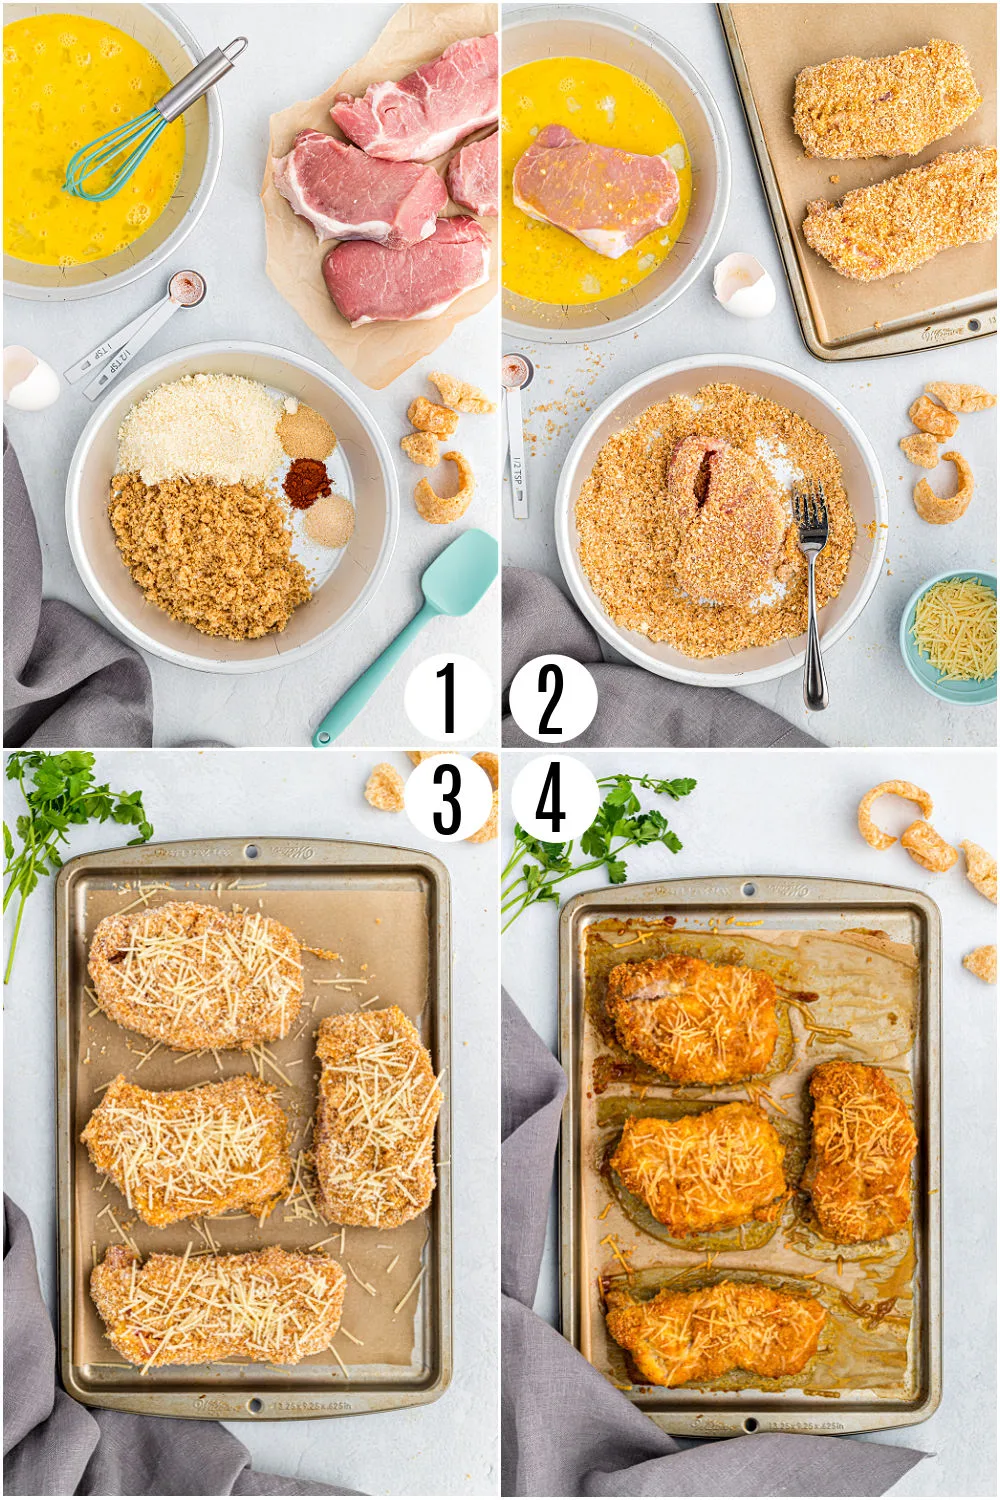 Step by step photos showing how to make low carb baked pork chops.